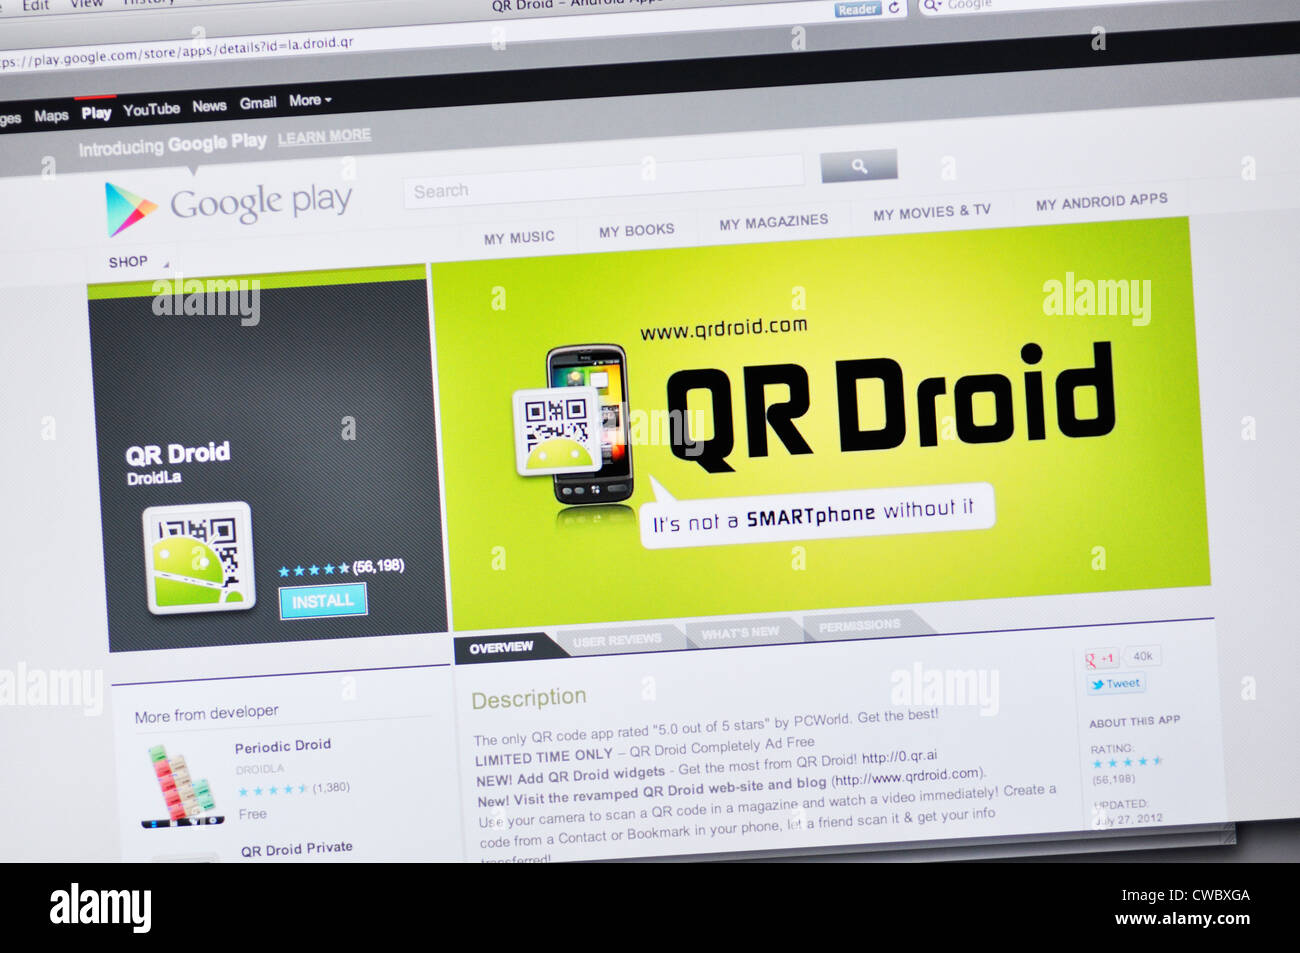 Webseite Google QR Droid - Android Apps auf Google Play Stockfoto